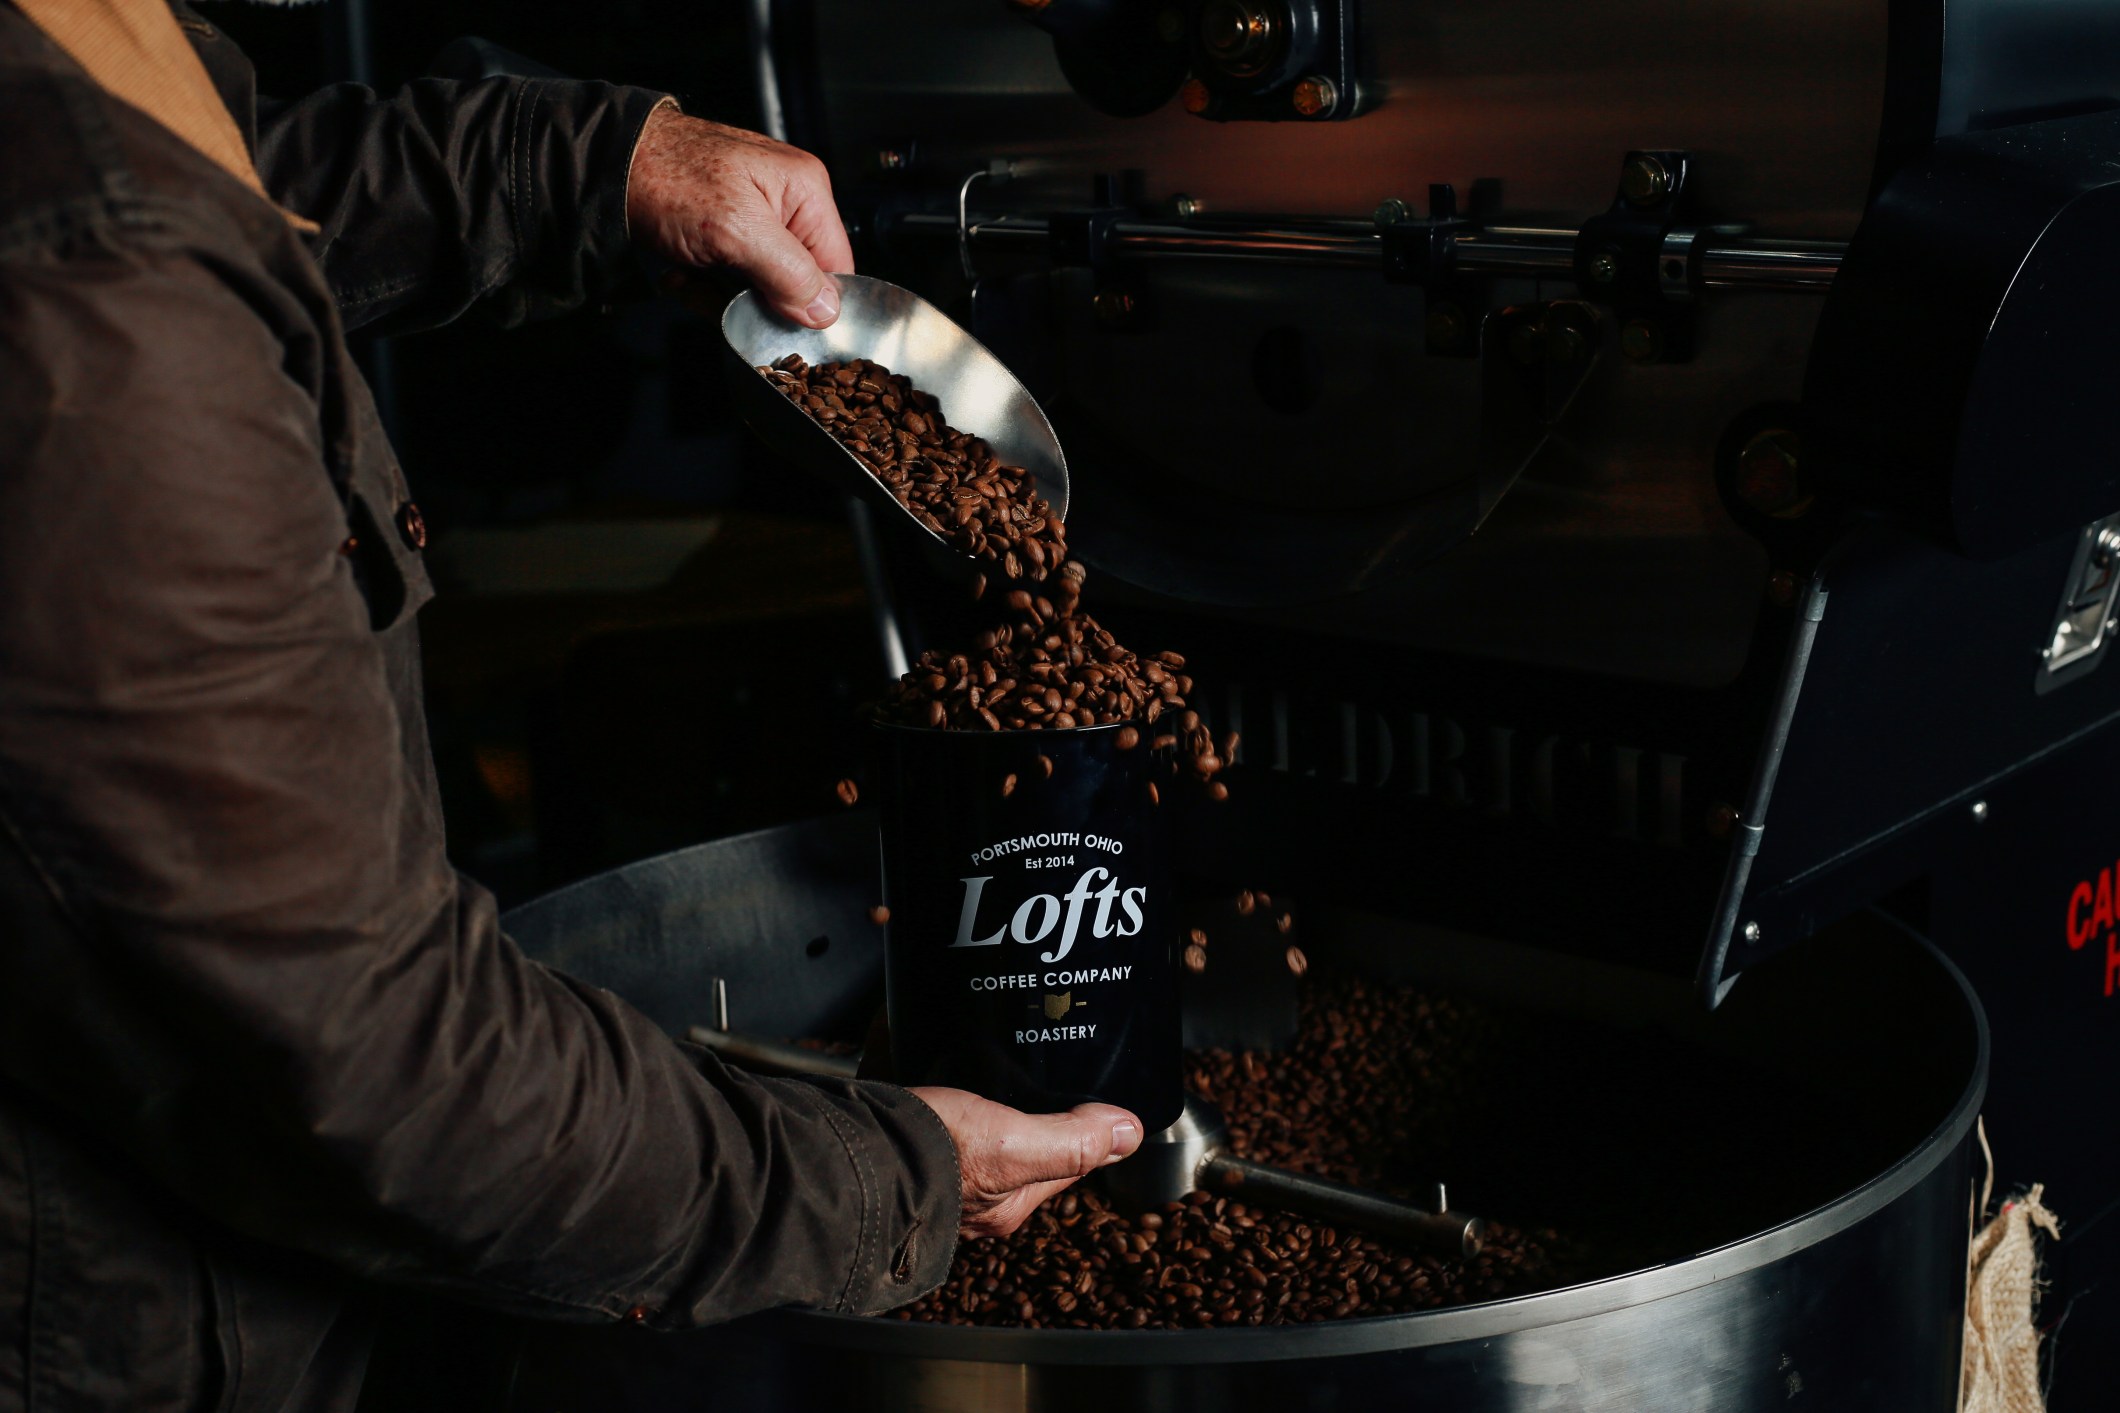 Lofts Coffee Company and Roastery of Portsmouth Plans Investment, Addition of Two Jobs